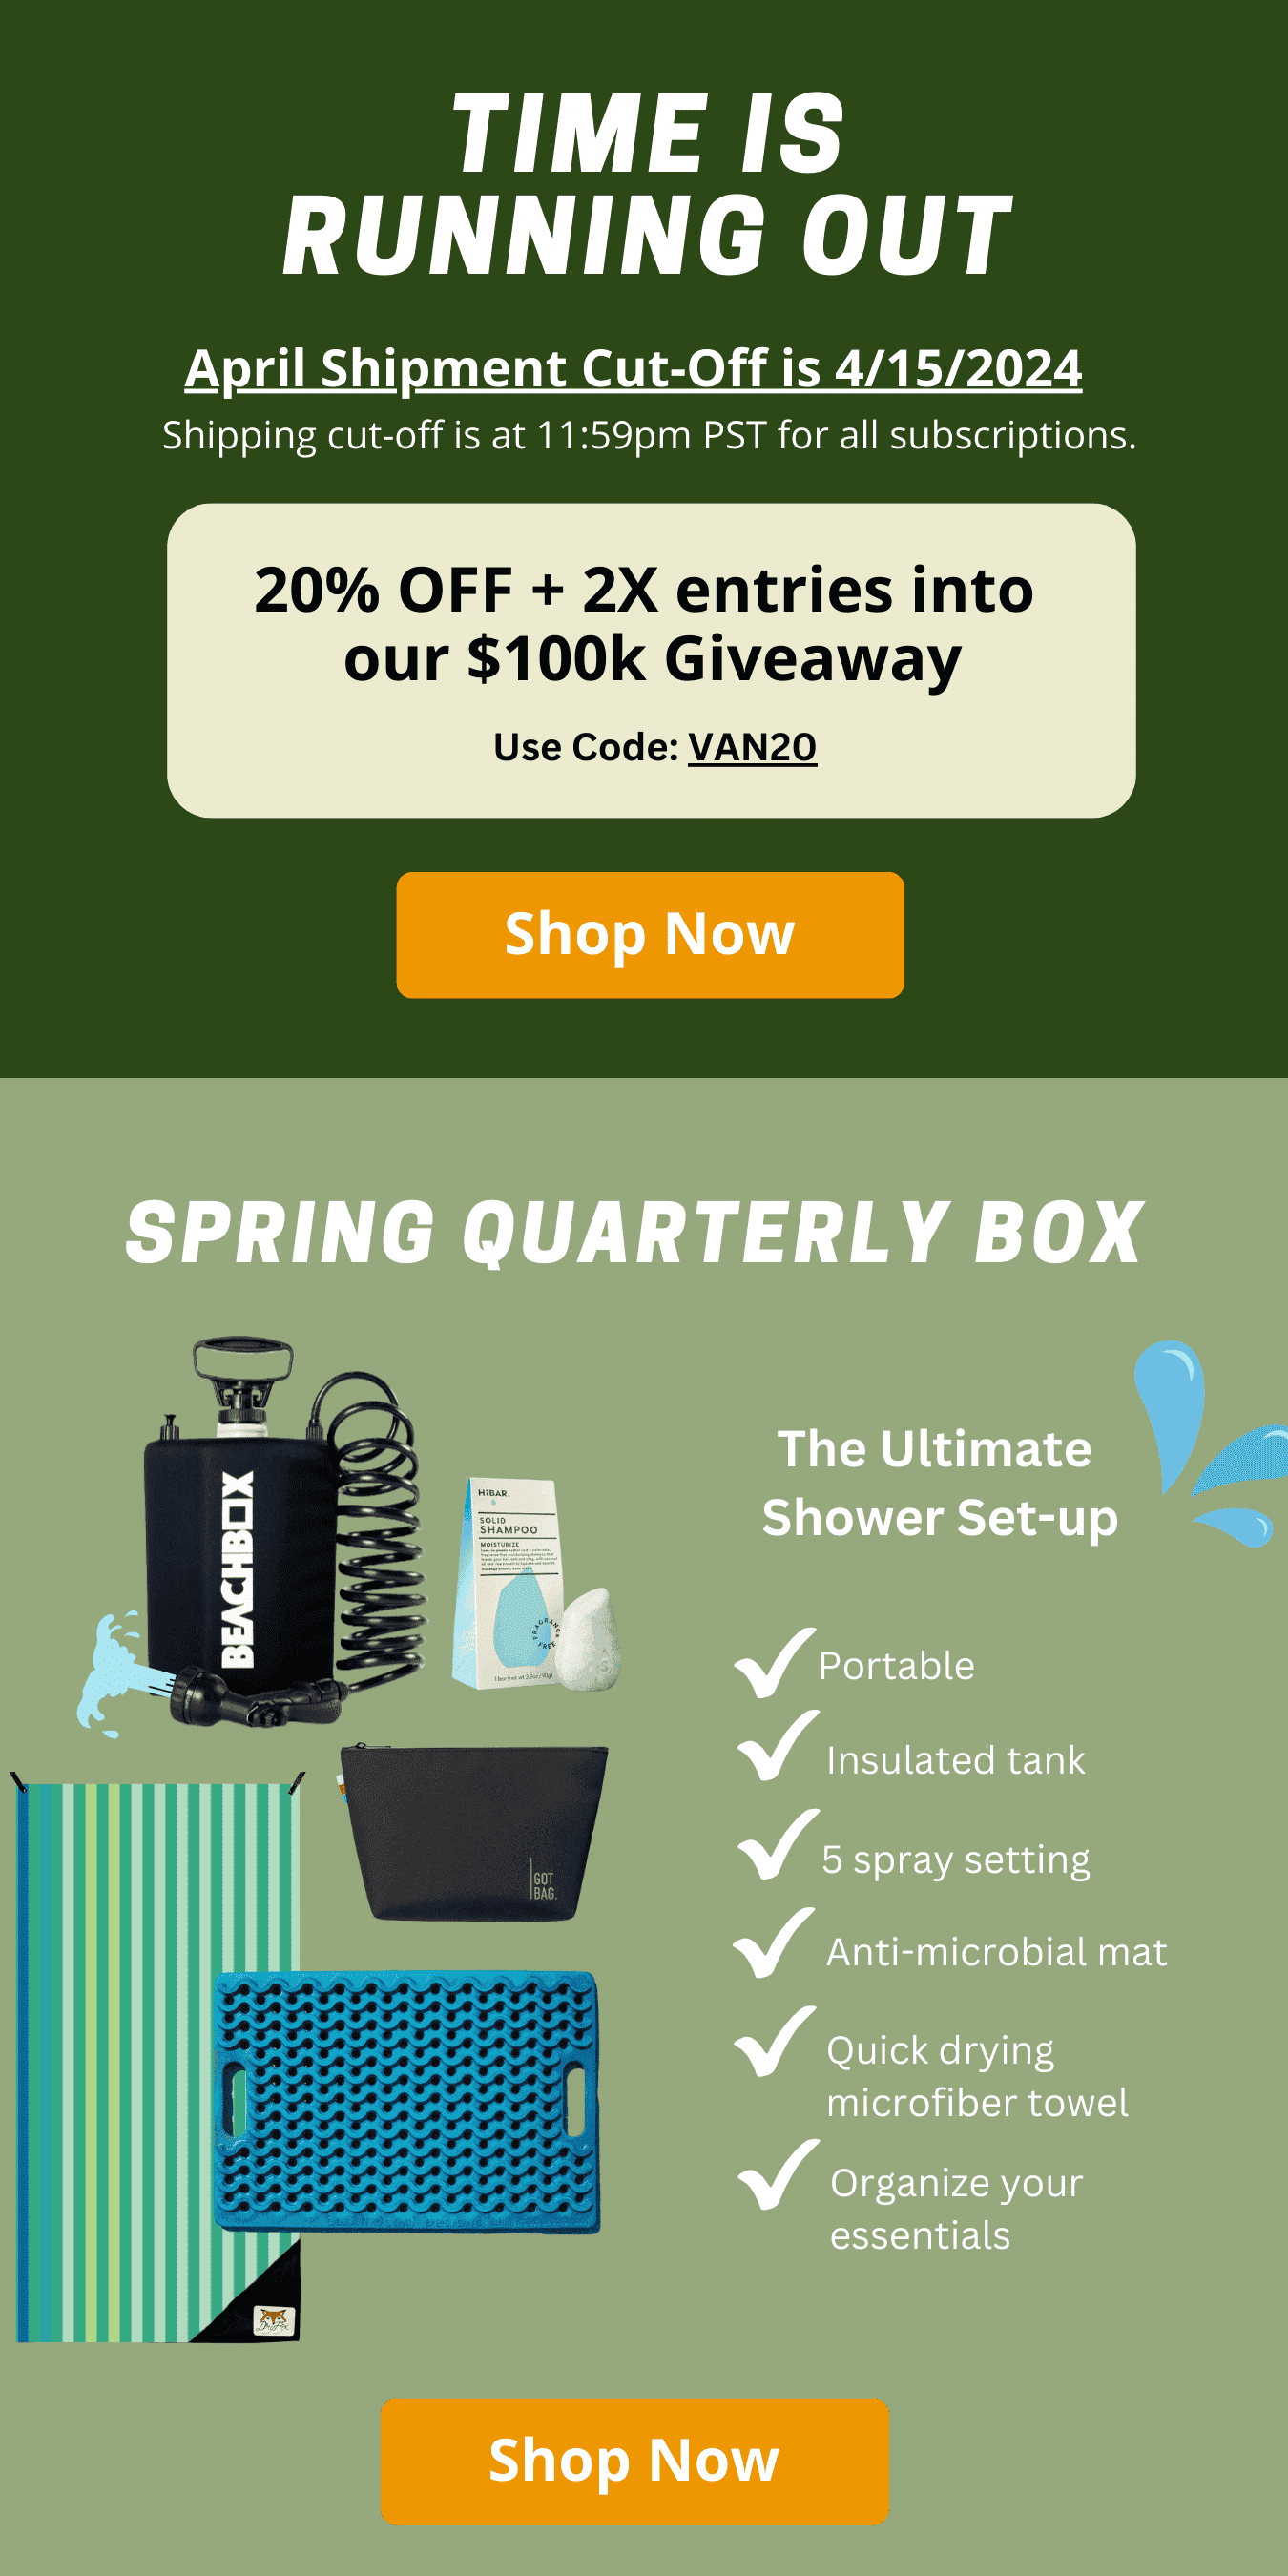 See inside our spring box